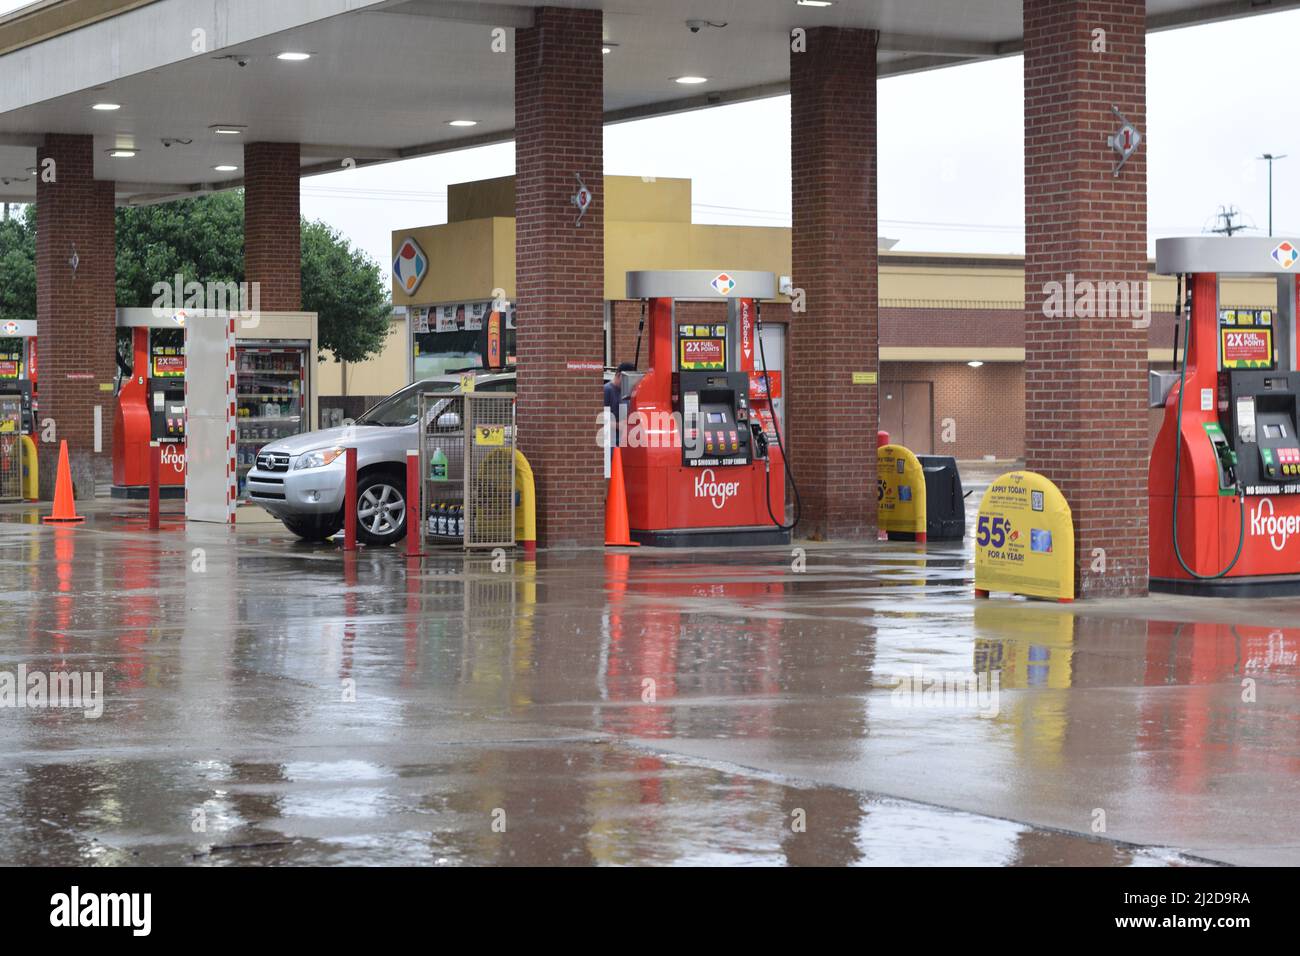 A customer pumps gas into his car at a Kroger gas station on a rainy day Stock Photo